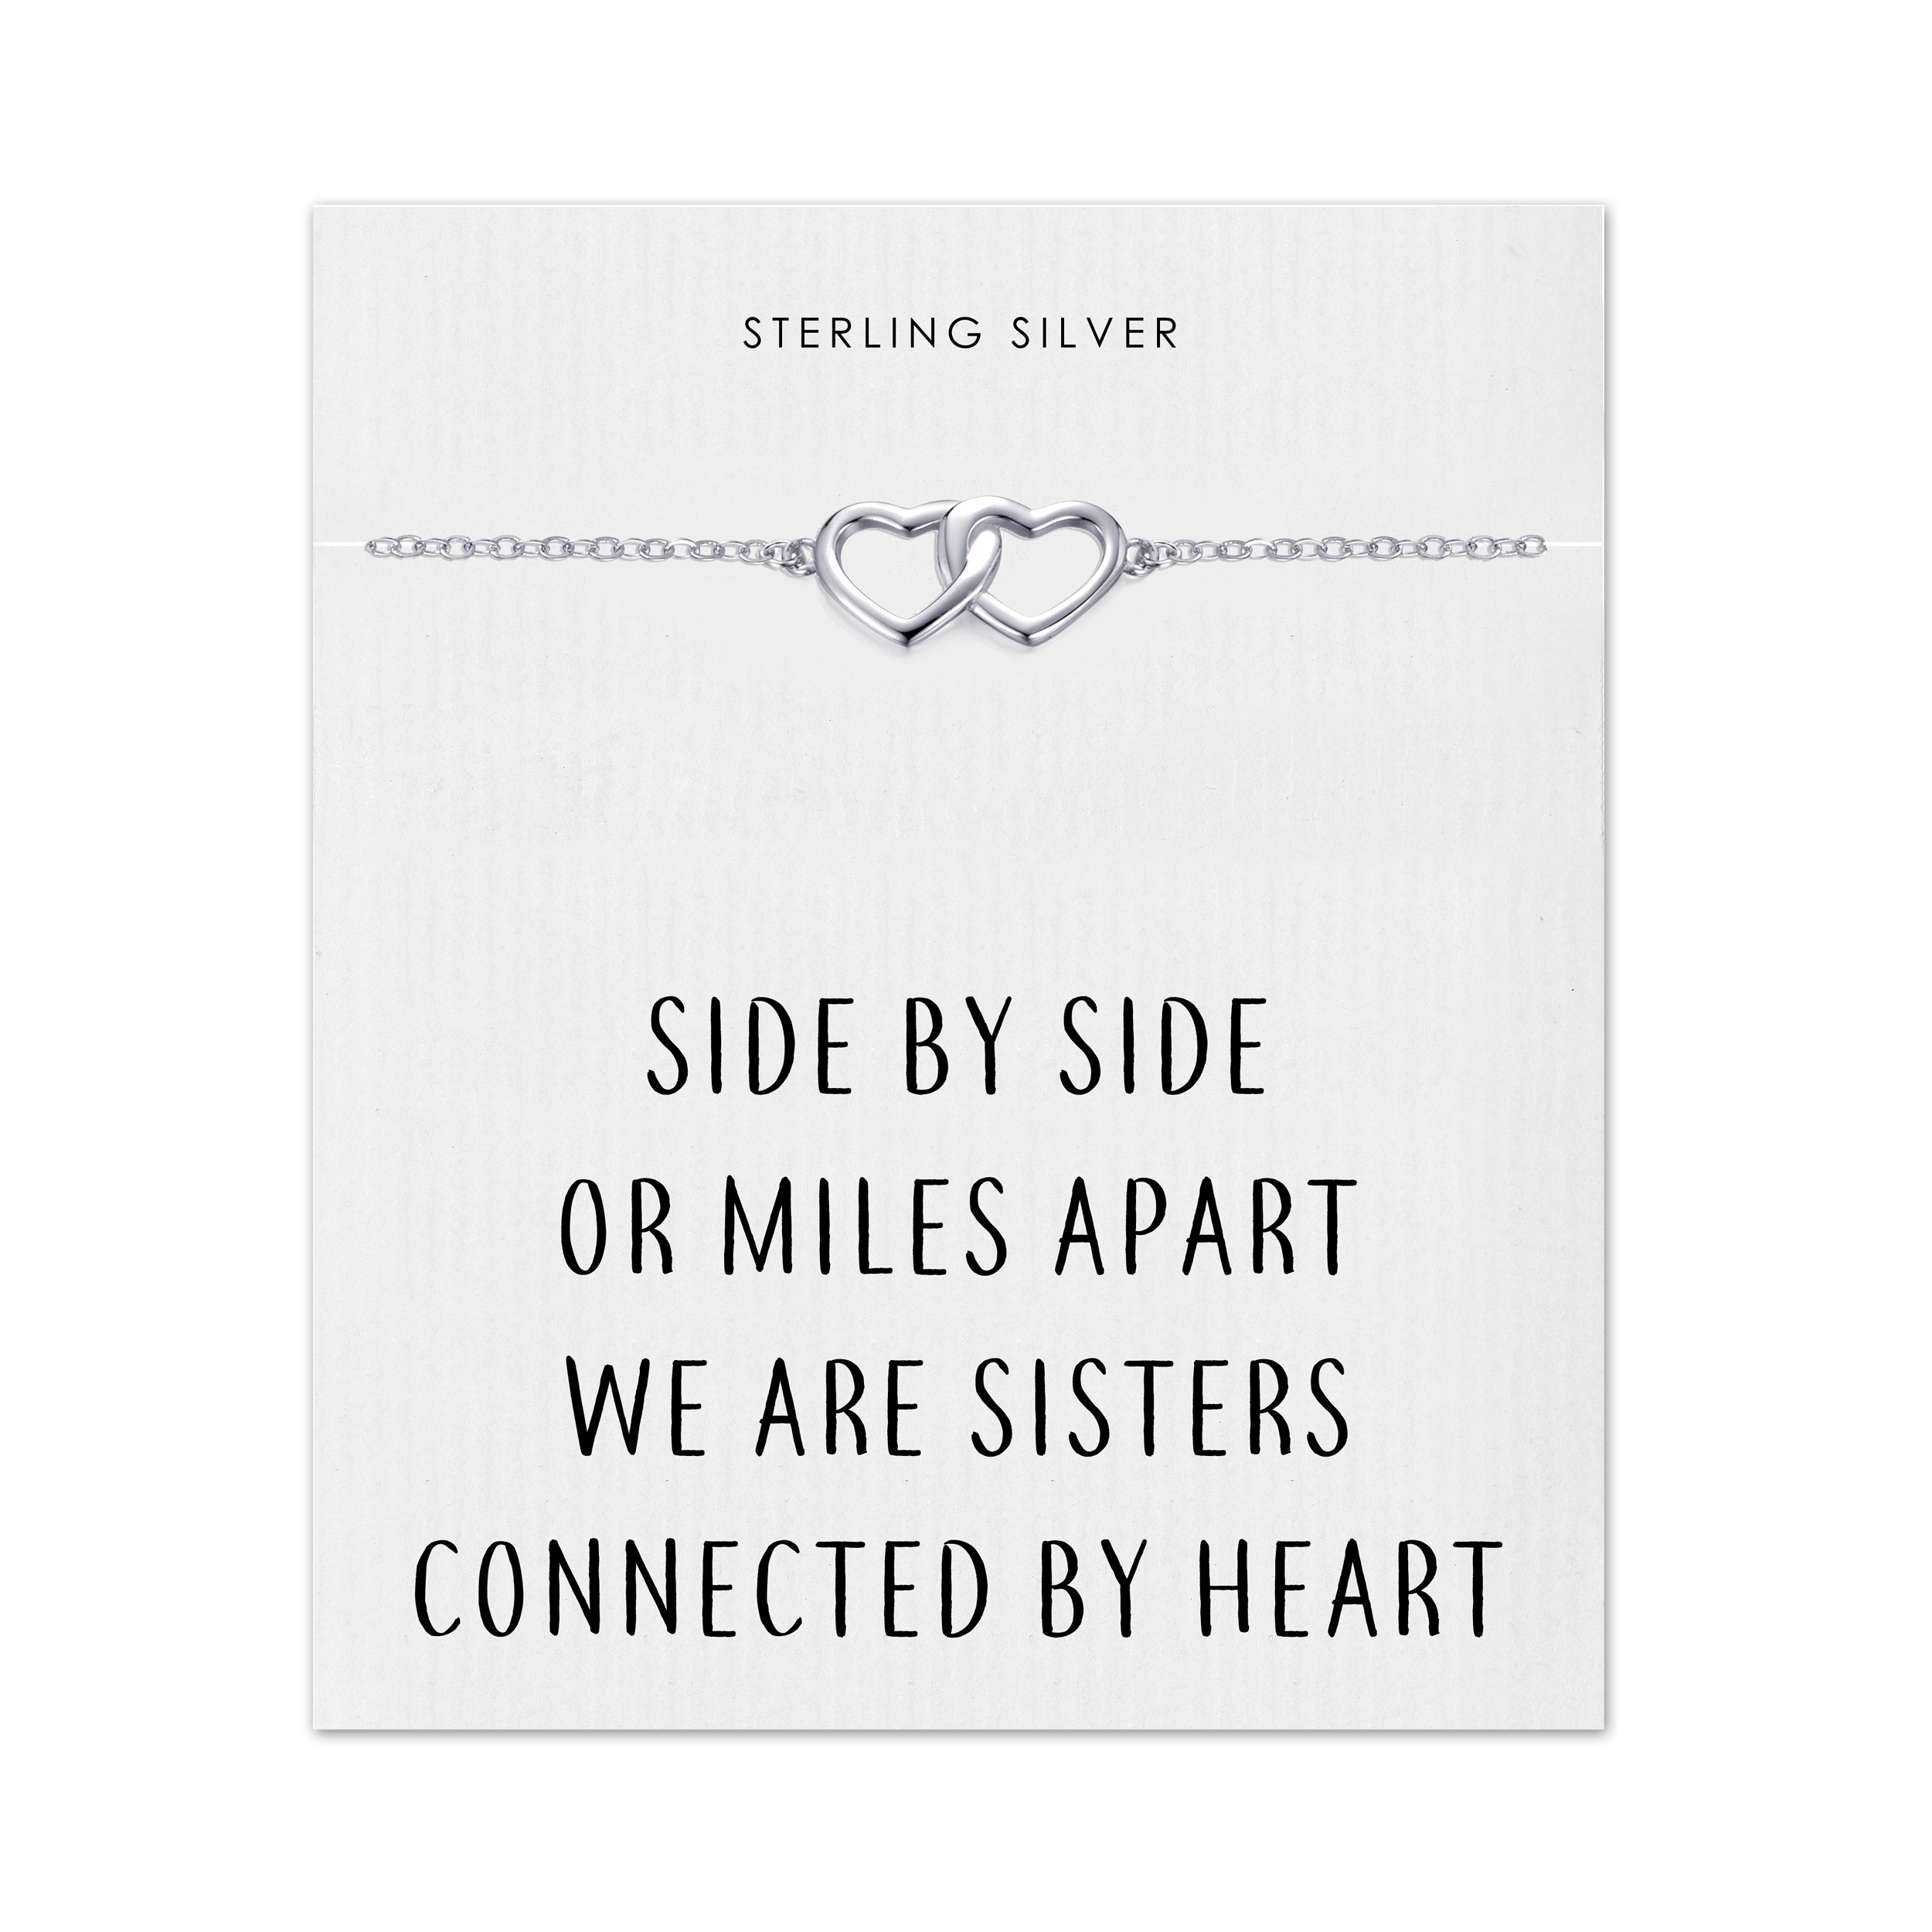 Sterling Silver Sister Heart Link Bracelet with Quote Card by Philip Jones Jewellery